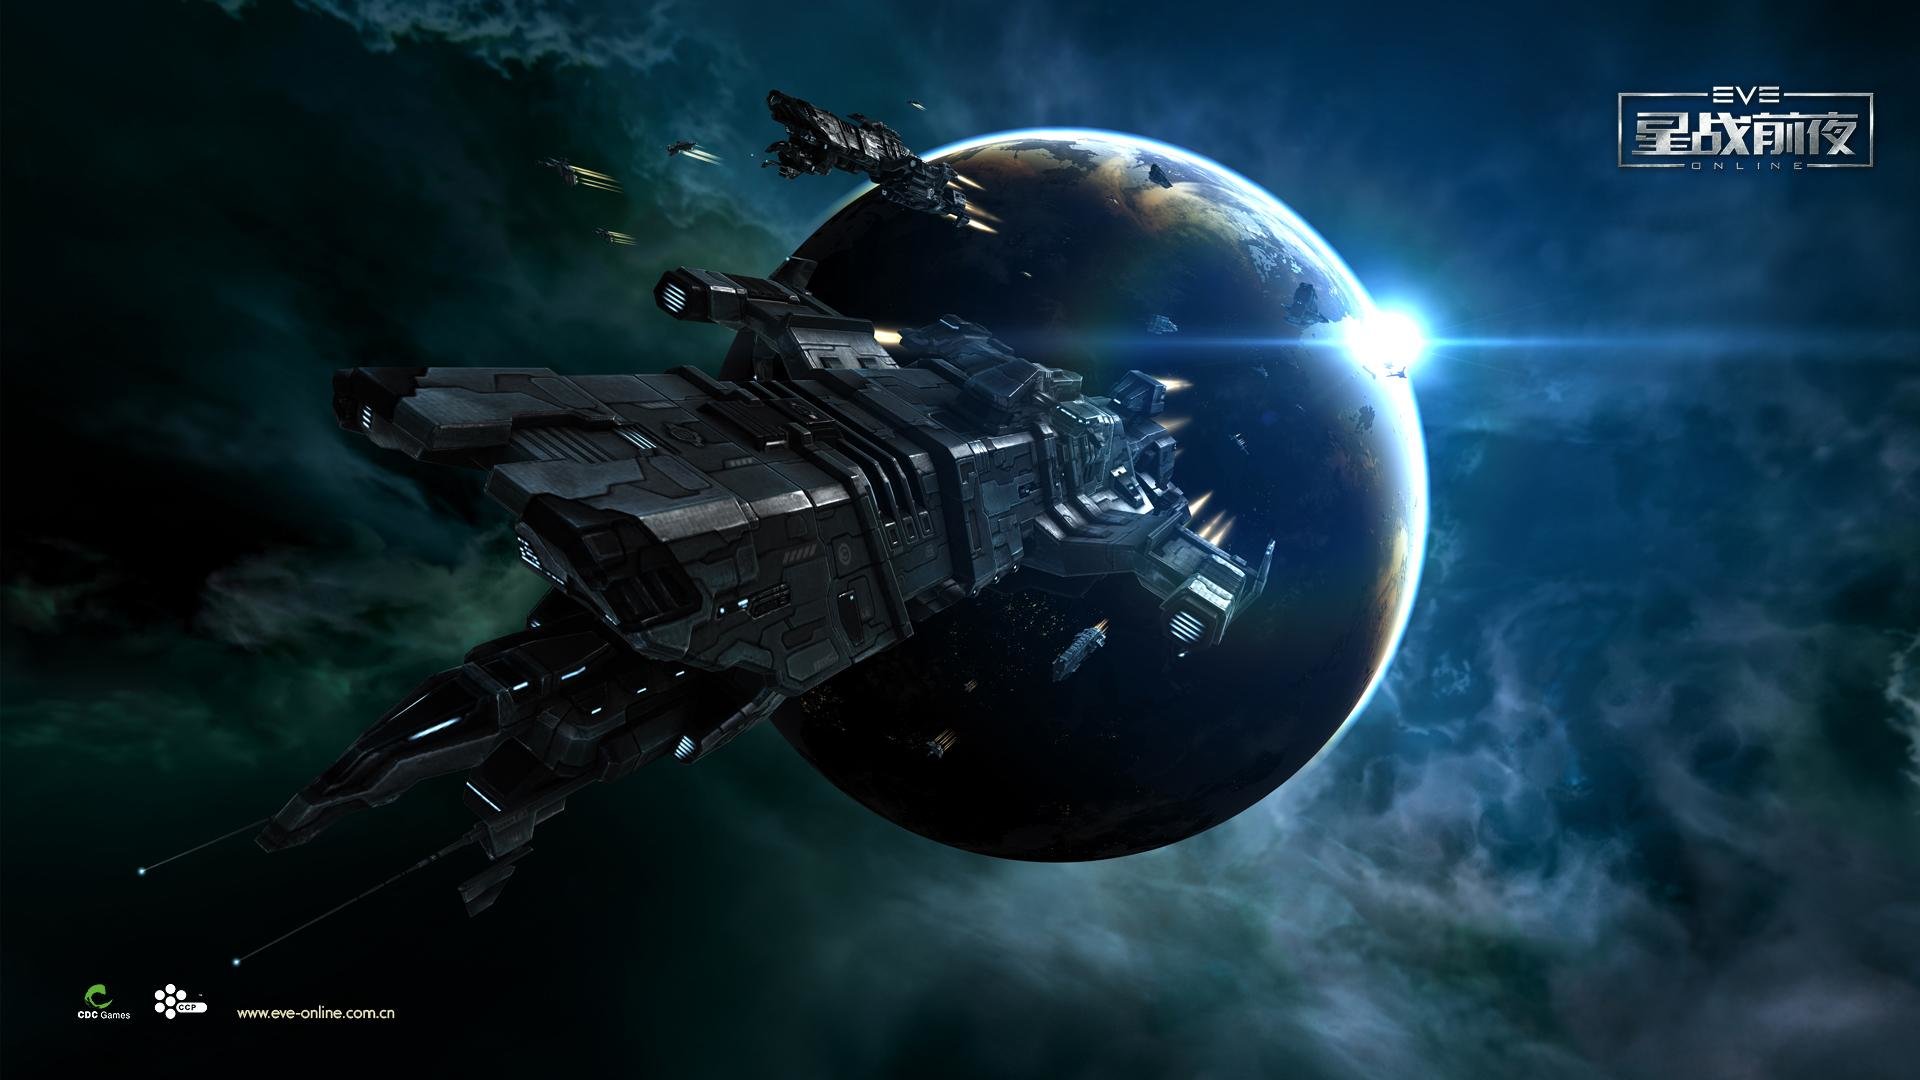 High resolution EVE Online full hd background ID:169226 for PC